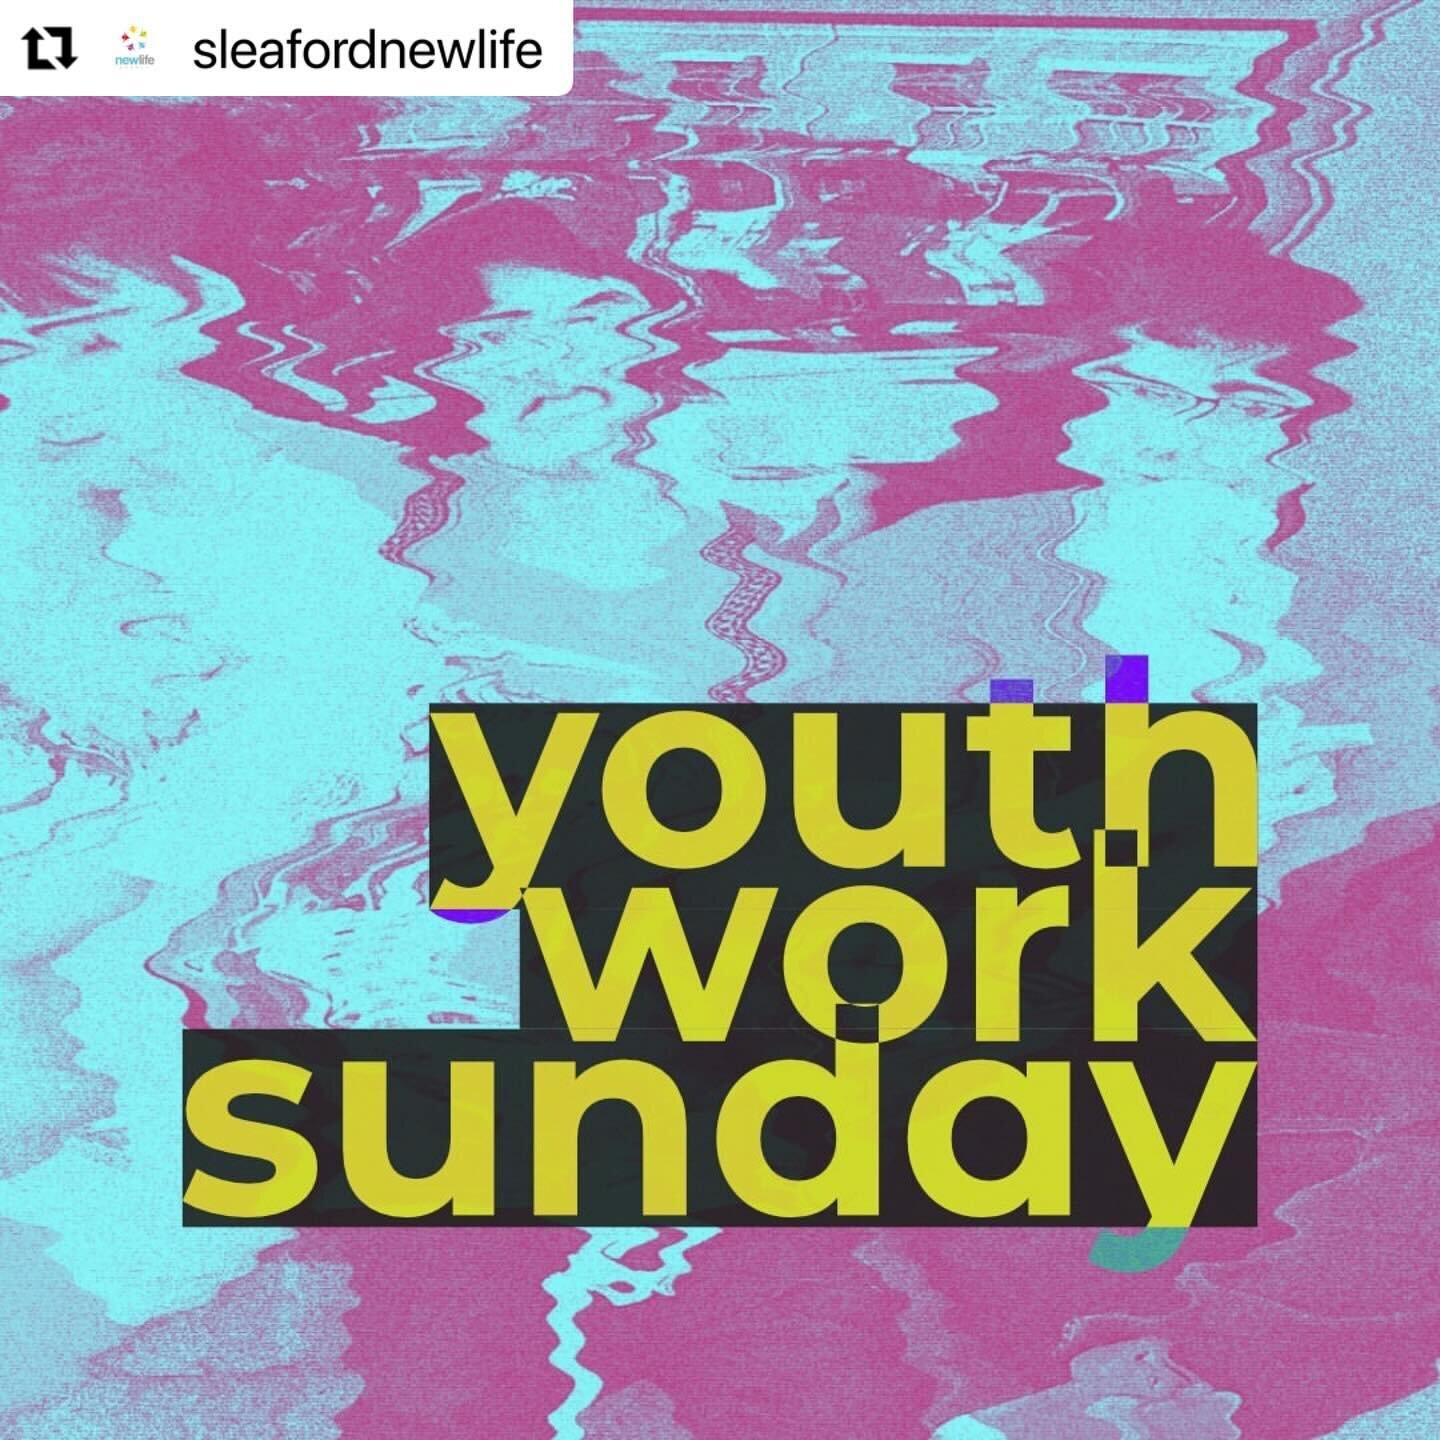 It&rsquo;s Youth Work Sunday tomorrow! Come and join us as we celebrate all things youth and young people in this special service! 

Repost @sleafordnewlife
・・・
Come and join us as we gather this Sunday at 10am! This week is Youth Work Sunday - a spe